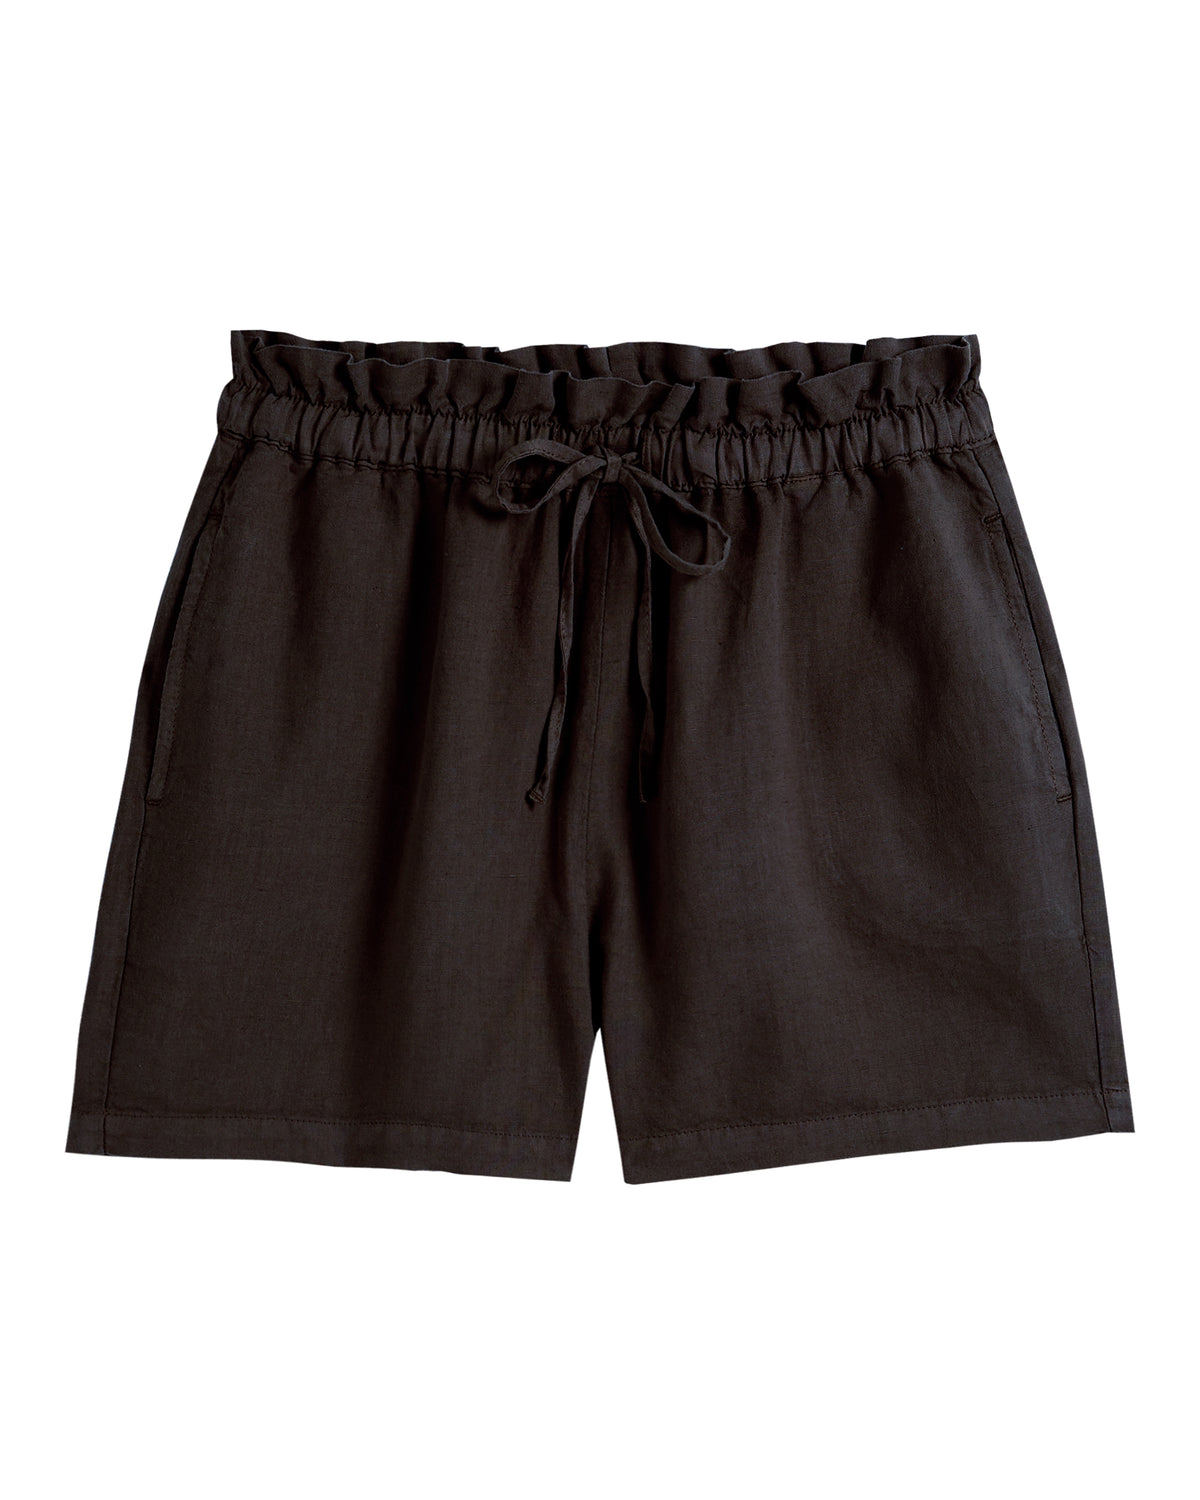 Washed black linen blend shorts with drawstring waist